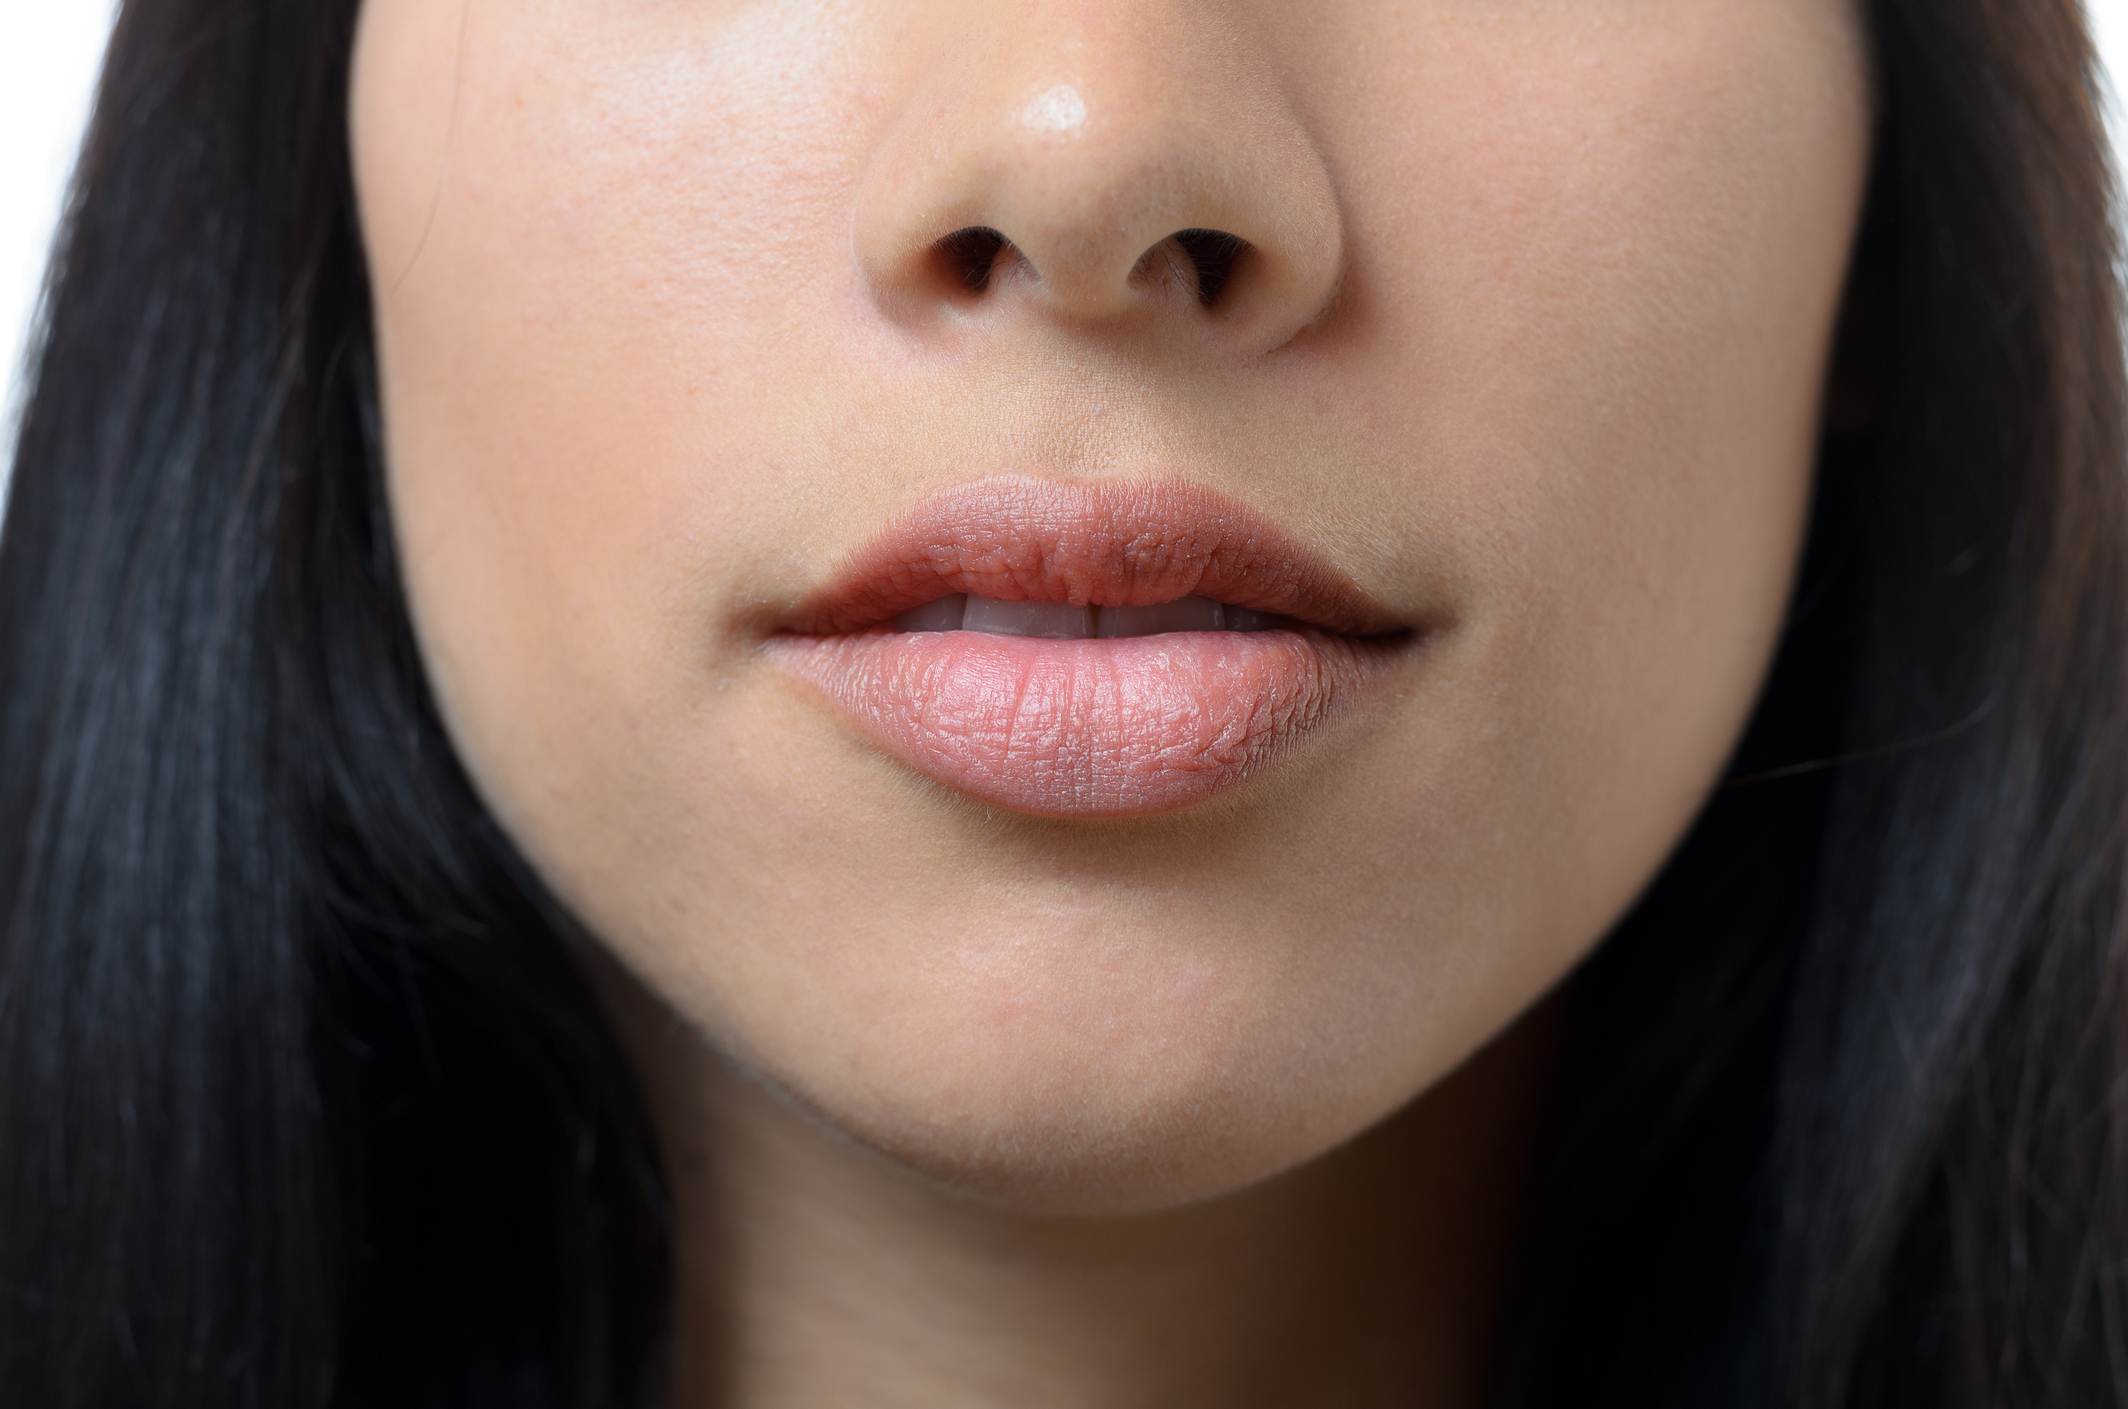 Natural lips and mouth of a young woman with no makeup and long dark hair, close up cropped view of her lower face